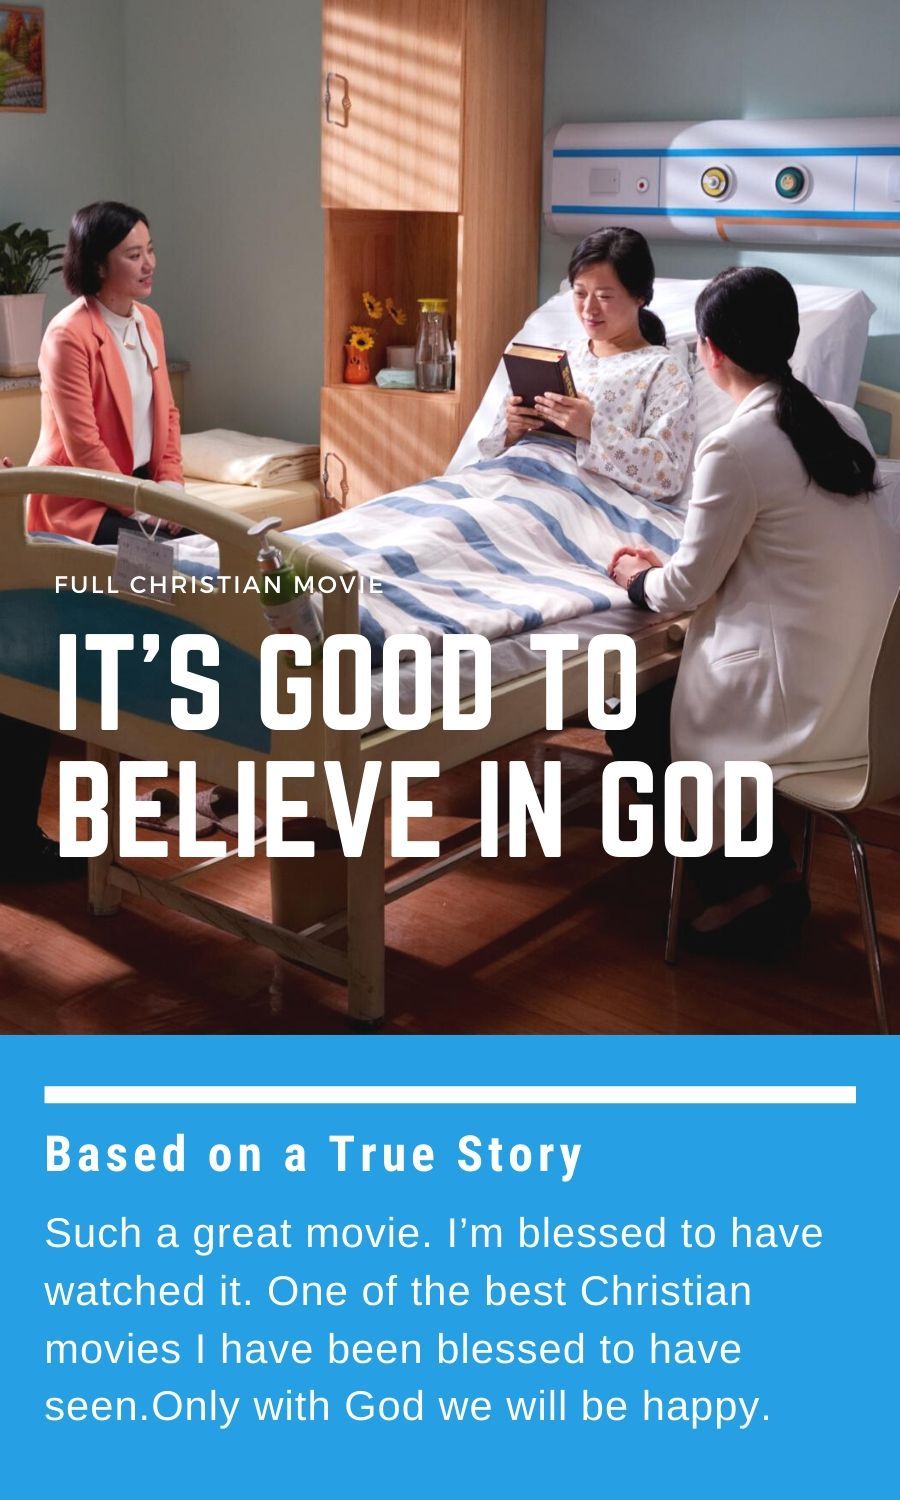 Is An Interview With God Based On A True Story - InterviewProTips.com